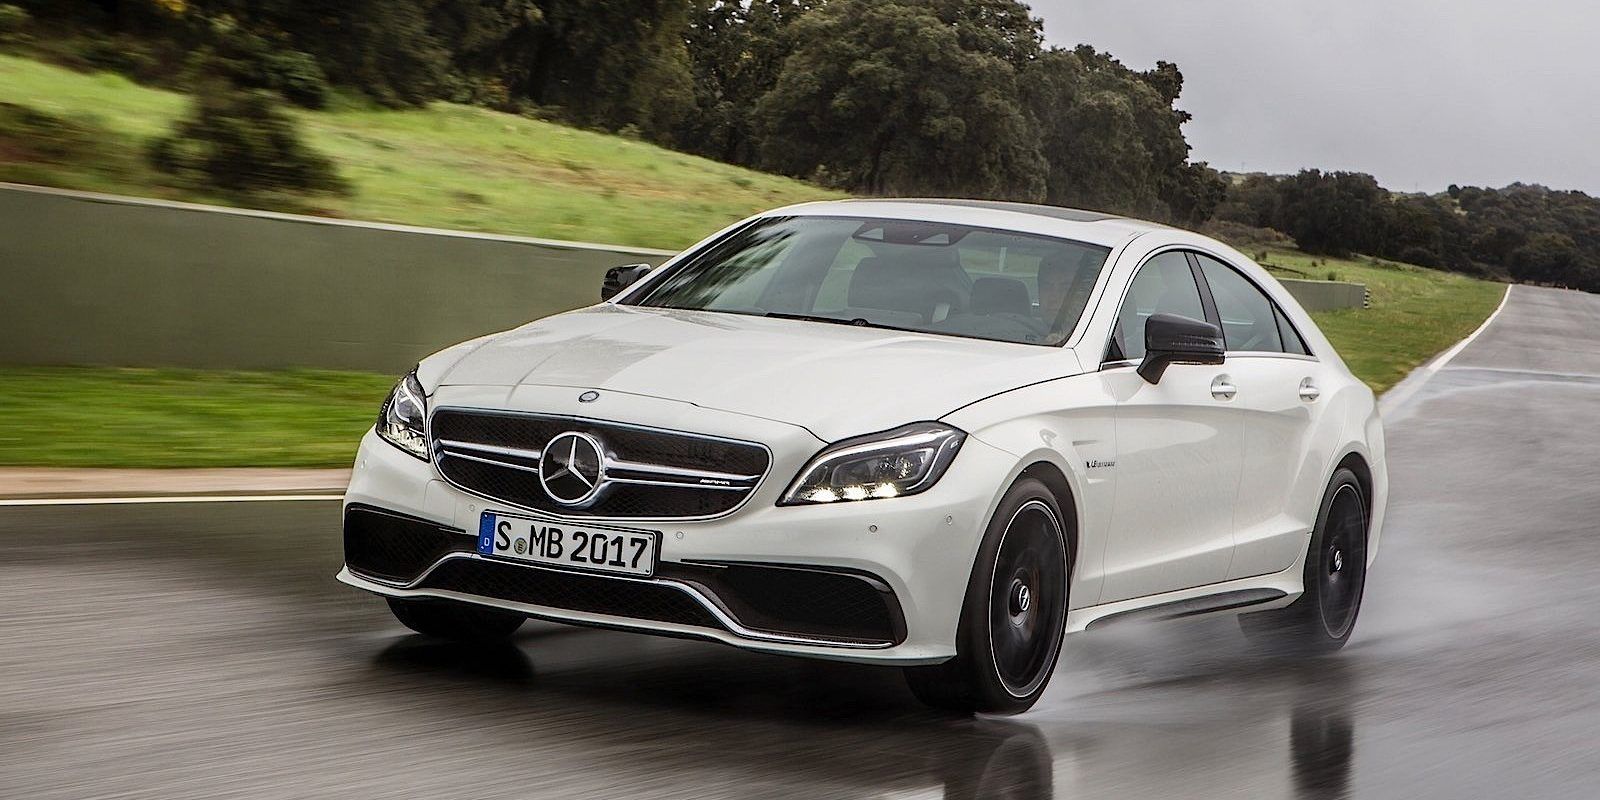 How Reliable Is A 2015 Mercedes CLS 63 AMG